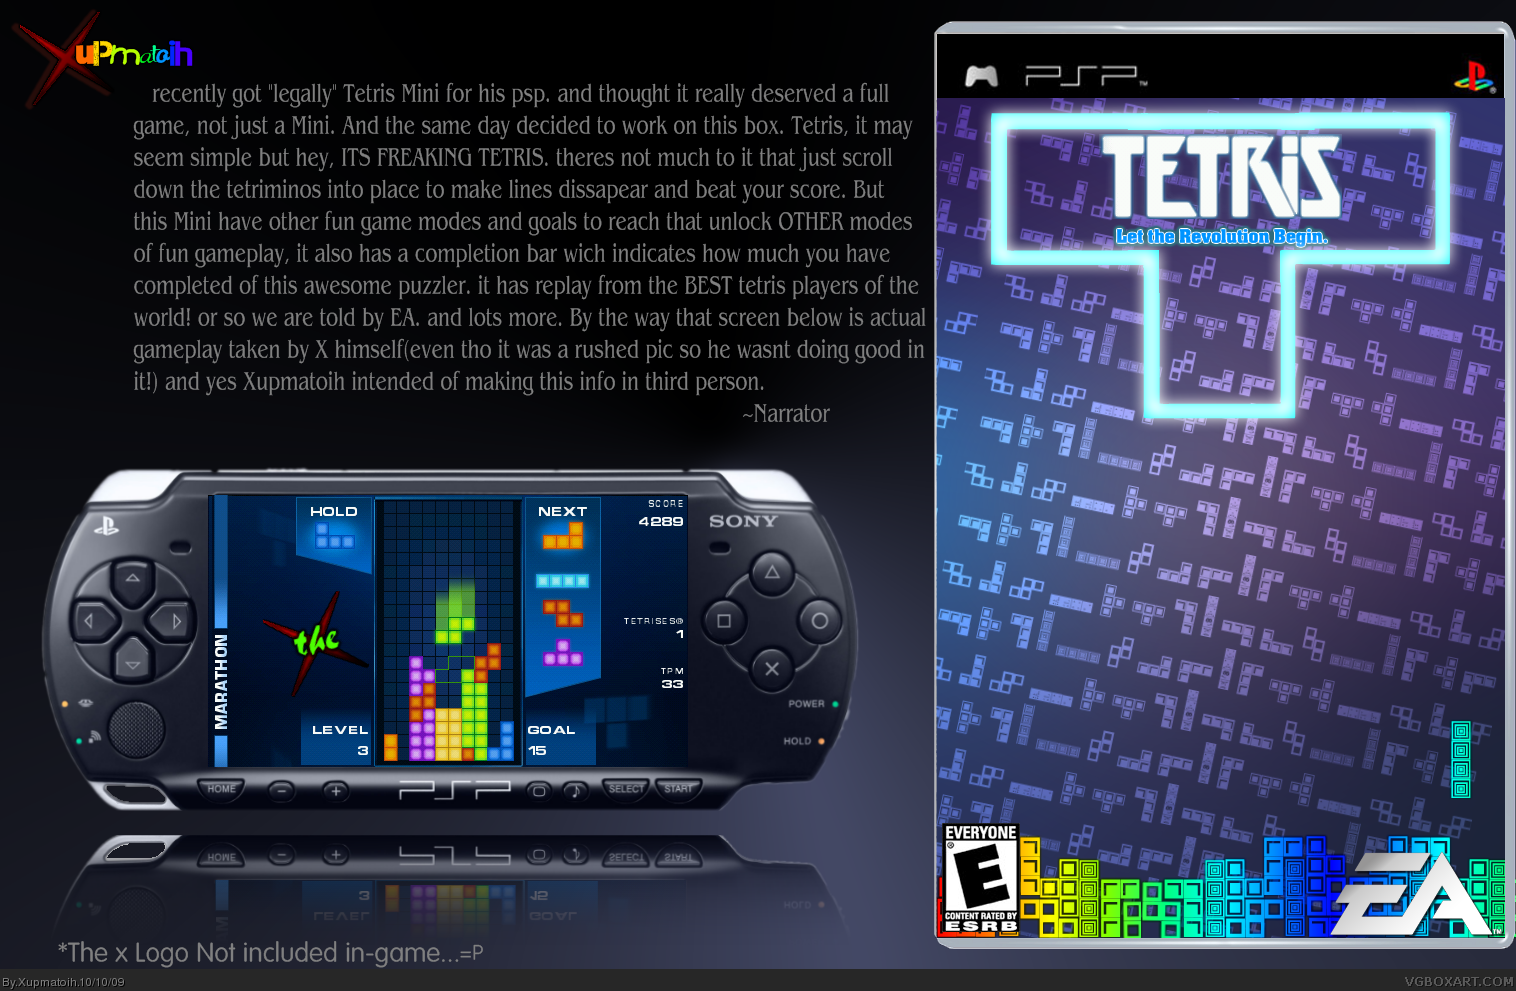 Viewing full size Tetris box cover.